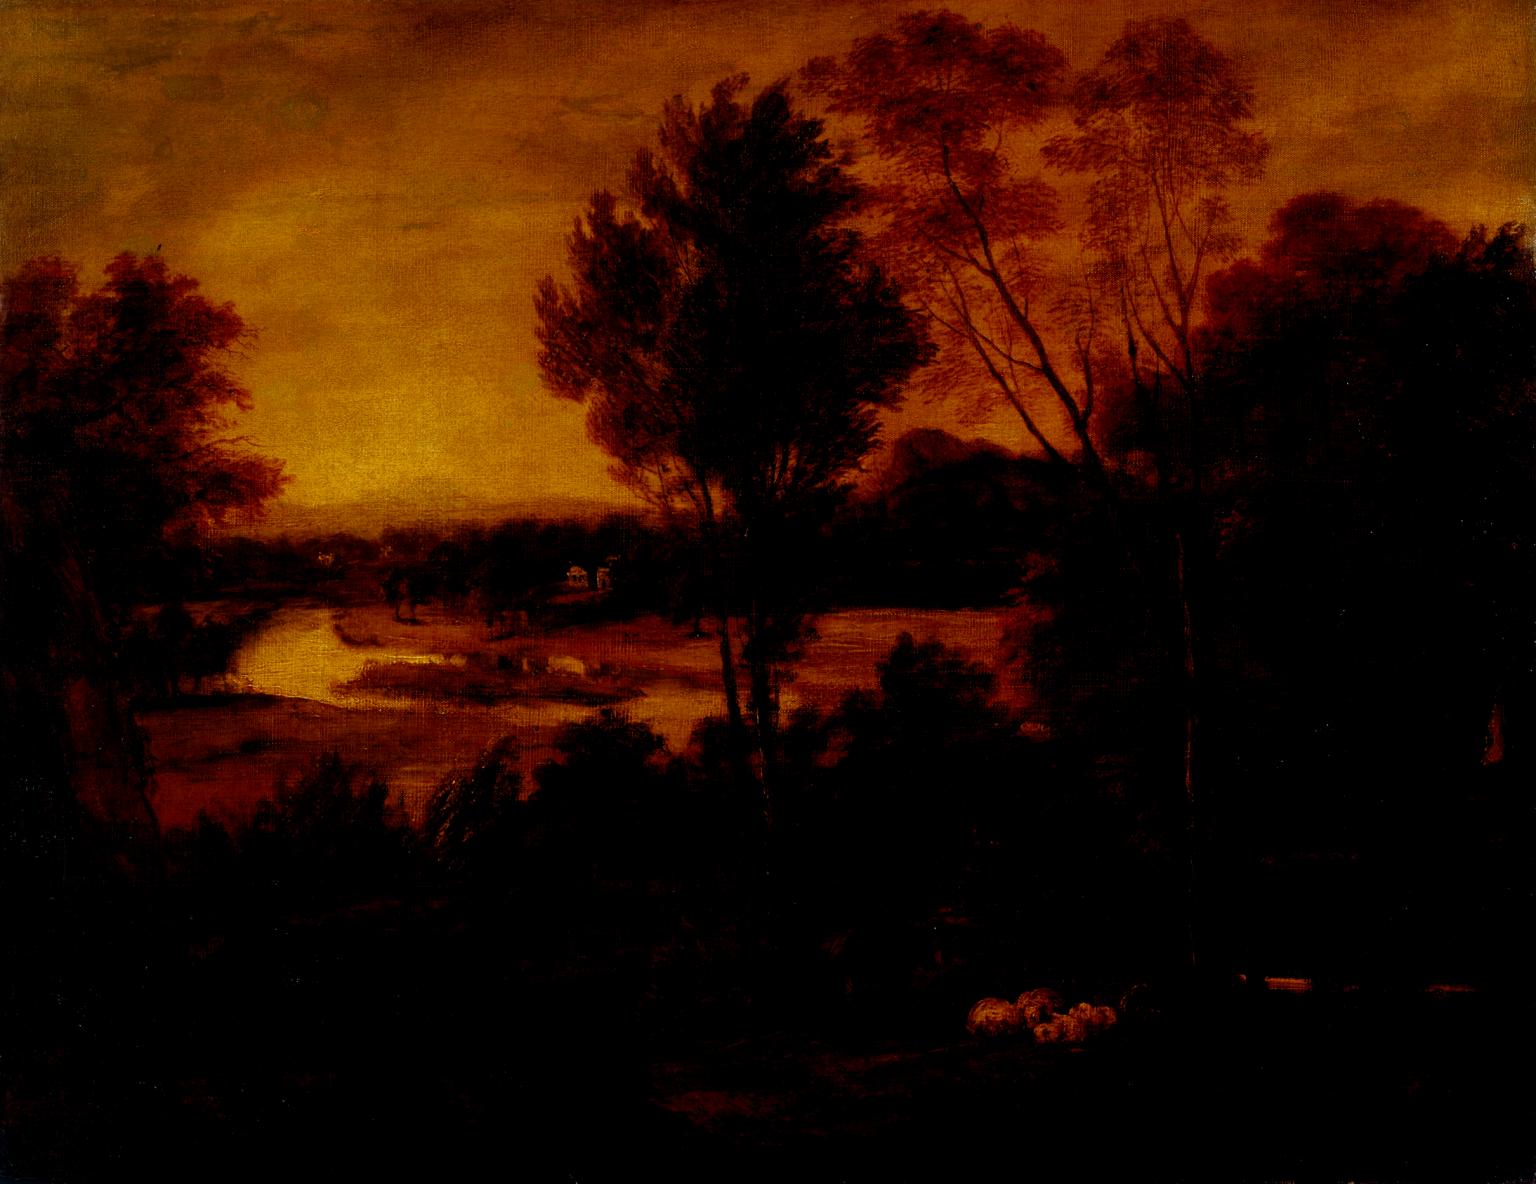 1788, oil on canvas, 69.8 x 90.8 cm. Tate, London (N05635). Mannings no. 2189. This image represents the exact object shown at the British Institution loan exhibition of 1823 as cat. no 6, <i>Landscape: View from Richmond Hill</i>